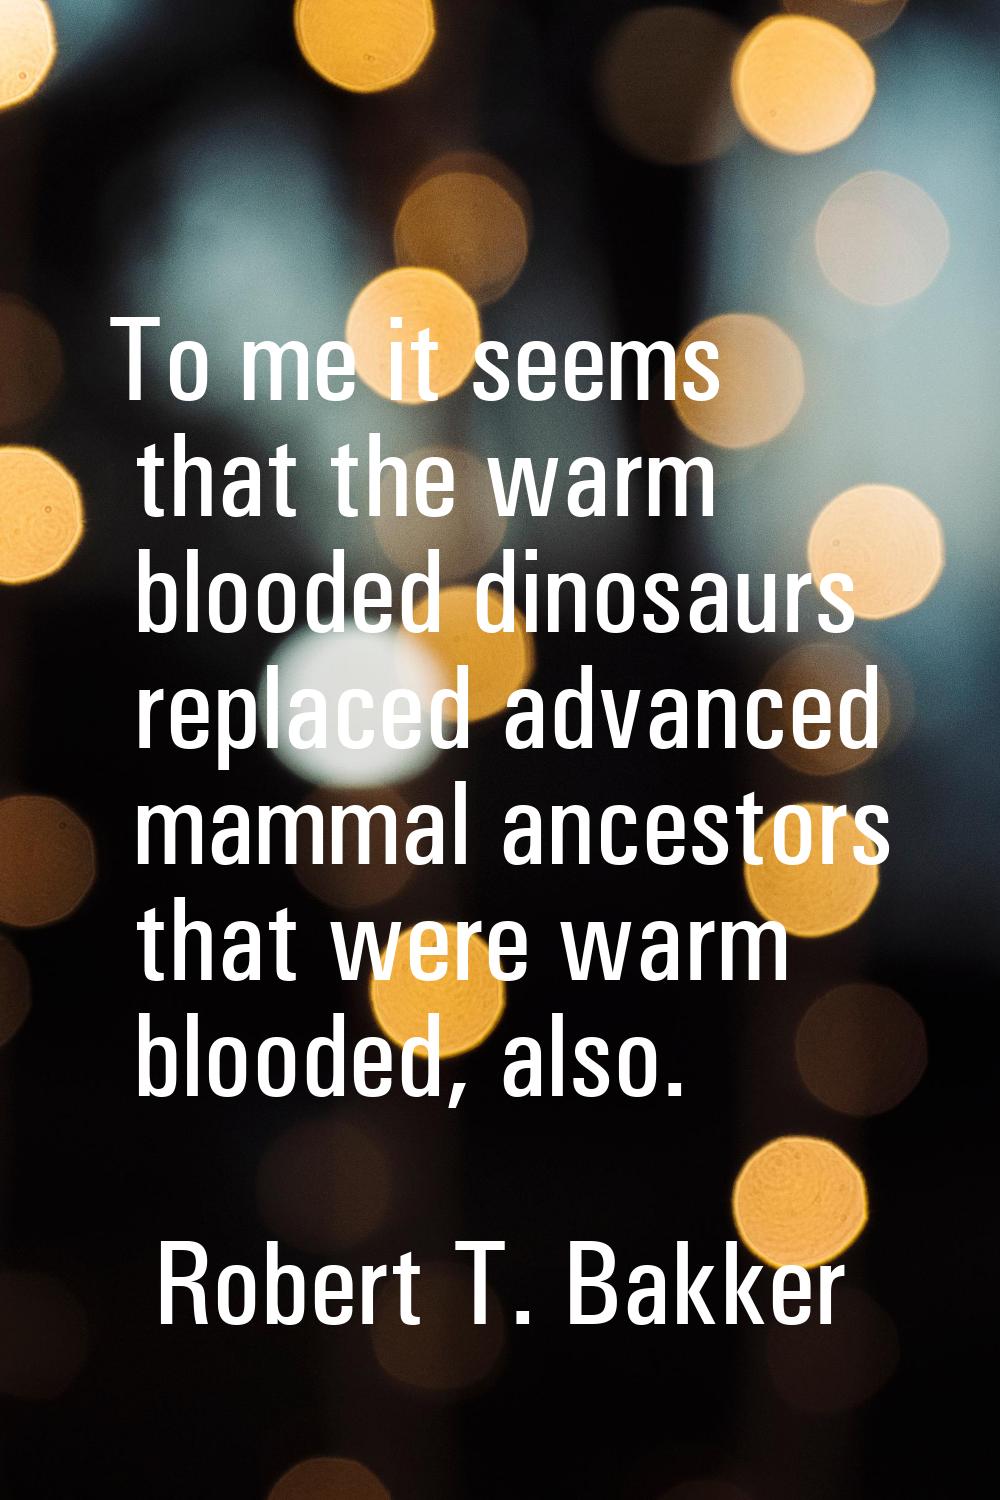 To me it seems that the warm blooded dinosaurs replaced advanced mammal ancestors that were warm bl